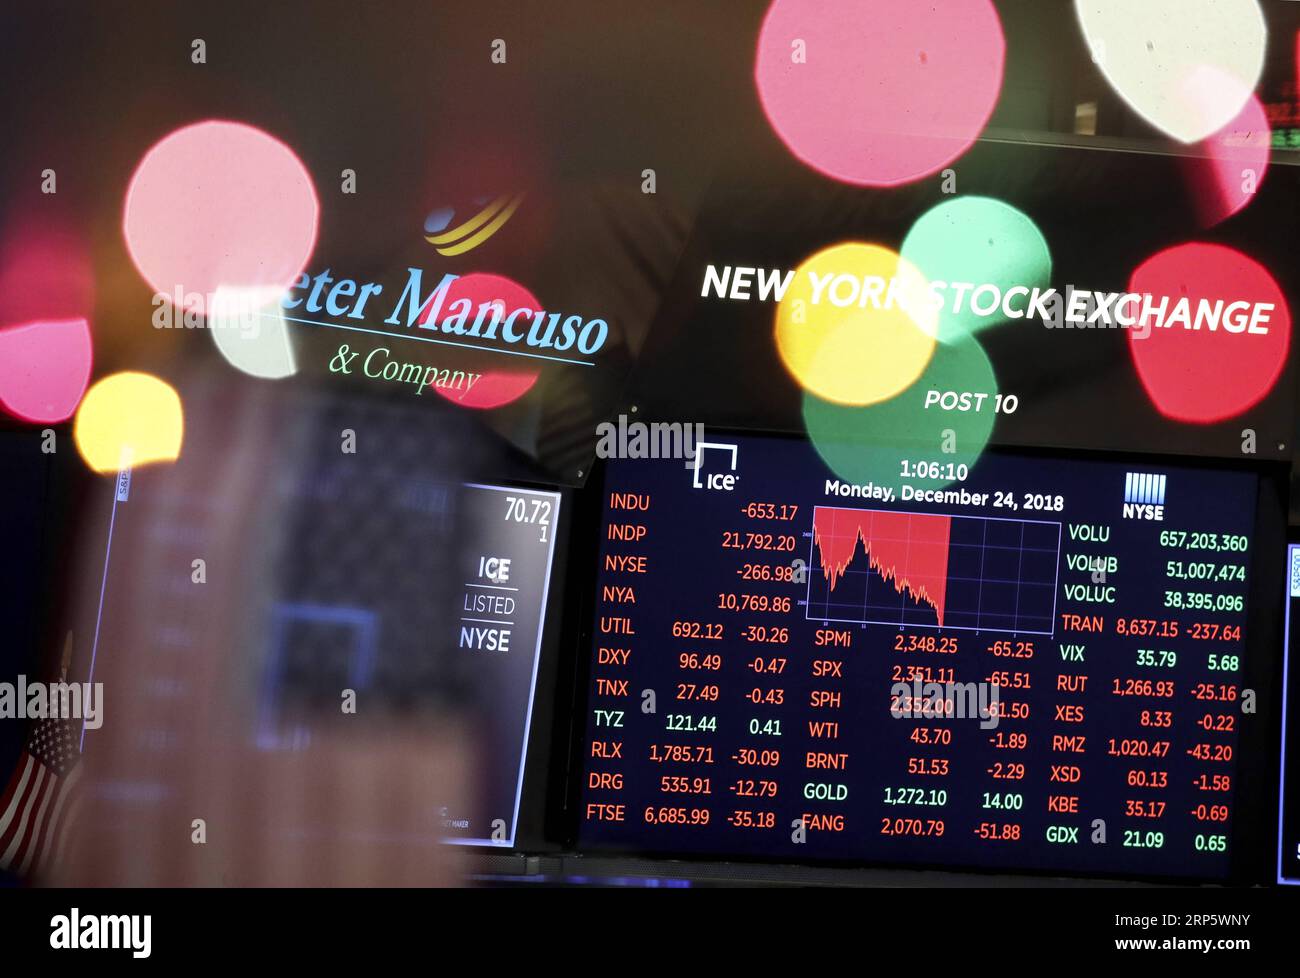 (181224) -- NEW YORK, Dec. 24, 2018 -- The trading information is seen on an electronic screen at the New York Stock Exchange in New York, the United States, Dec. 24, 2018. U.S. stocks plunged on Monday, with most of the major indices booking their worst Christmas Eve decline, extending their huge losses in the previous week s rout. The Dow Jones Industrial Average slumped 653.17 points, or 2.91 percent, to 21792.20. The S&P 500 decreased 65.52 points, or 2.71 percent, to 2,351.10. The Nasdaq Composite Index slid 140.08 points, or 2.21 percent, to 6,192.92. ) U.S.-NEW YORK-STOCKS-PLUNGE WangxY Stock Photo